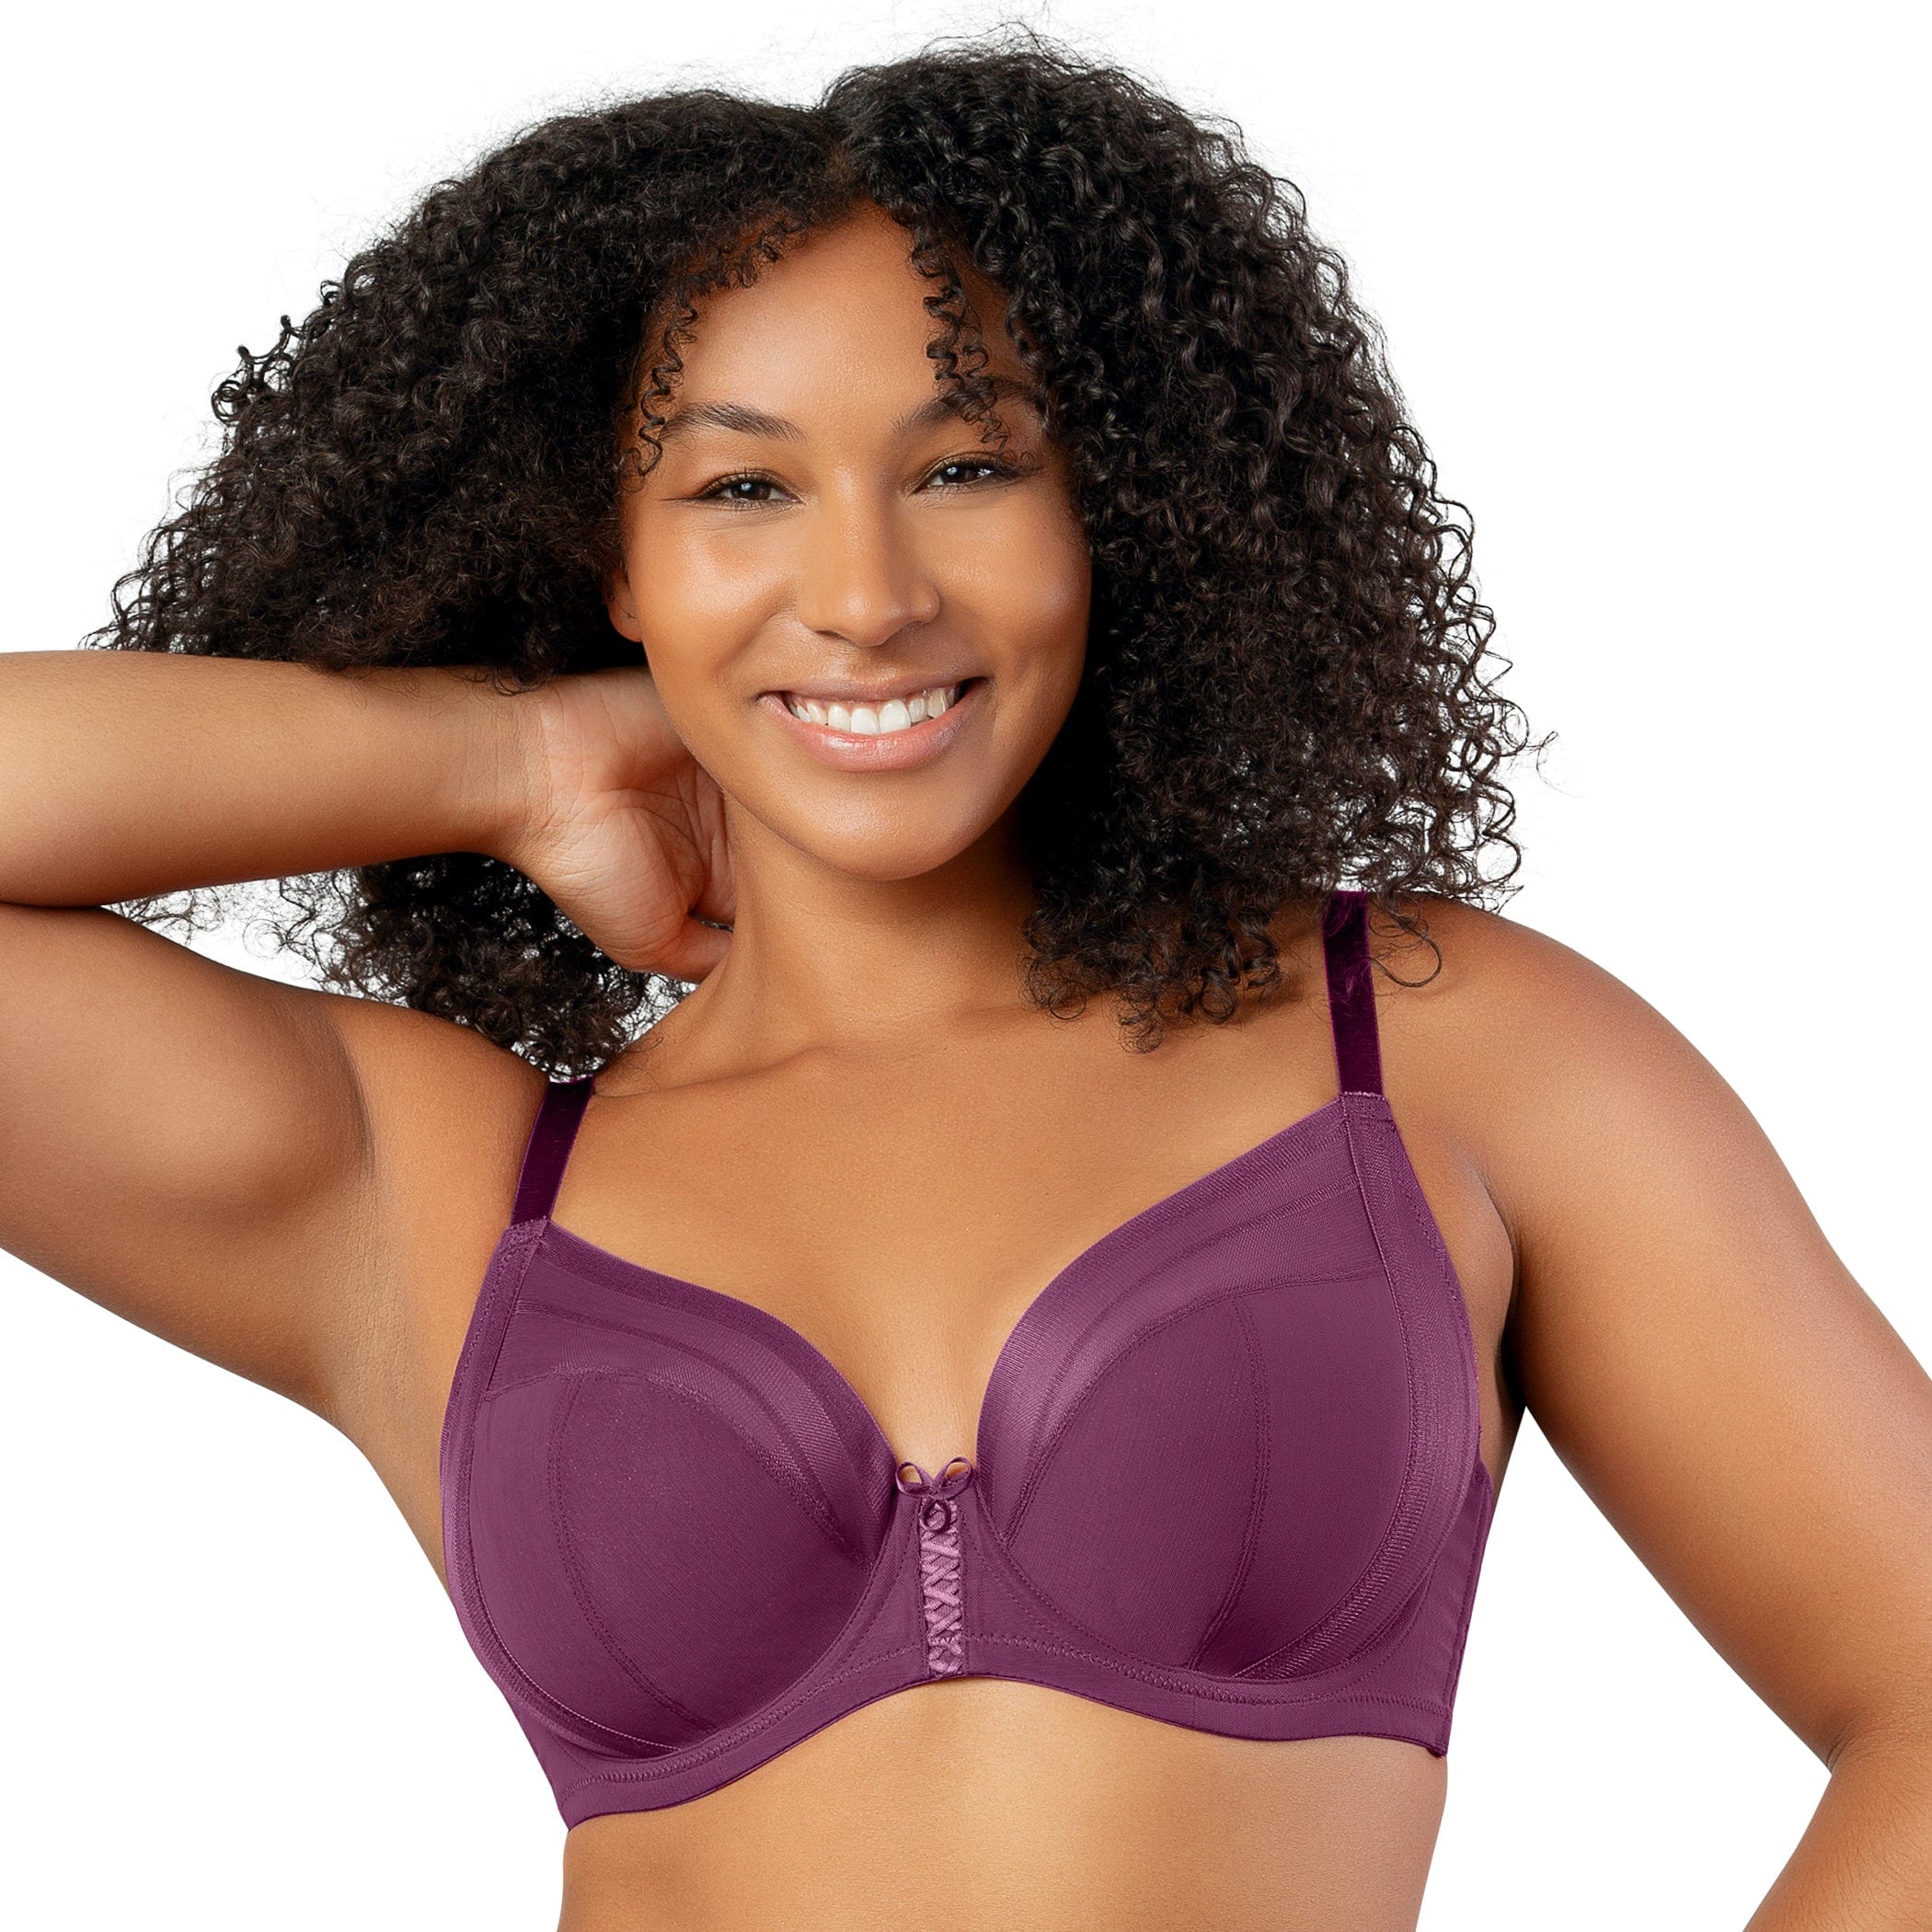 How To Find The Best Lingerie Colors For Your Skin Tone -  ParfaitLingerie.com - Blog